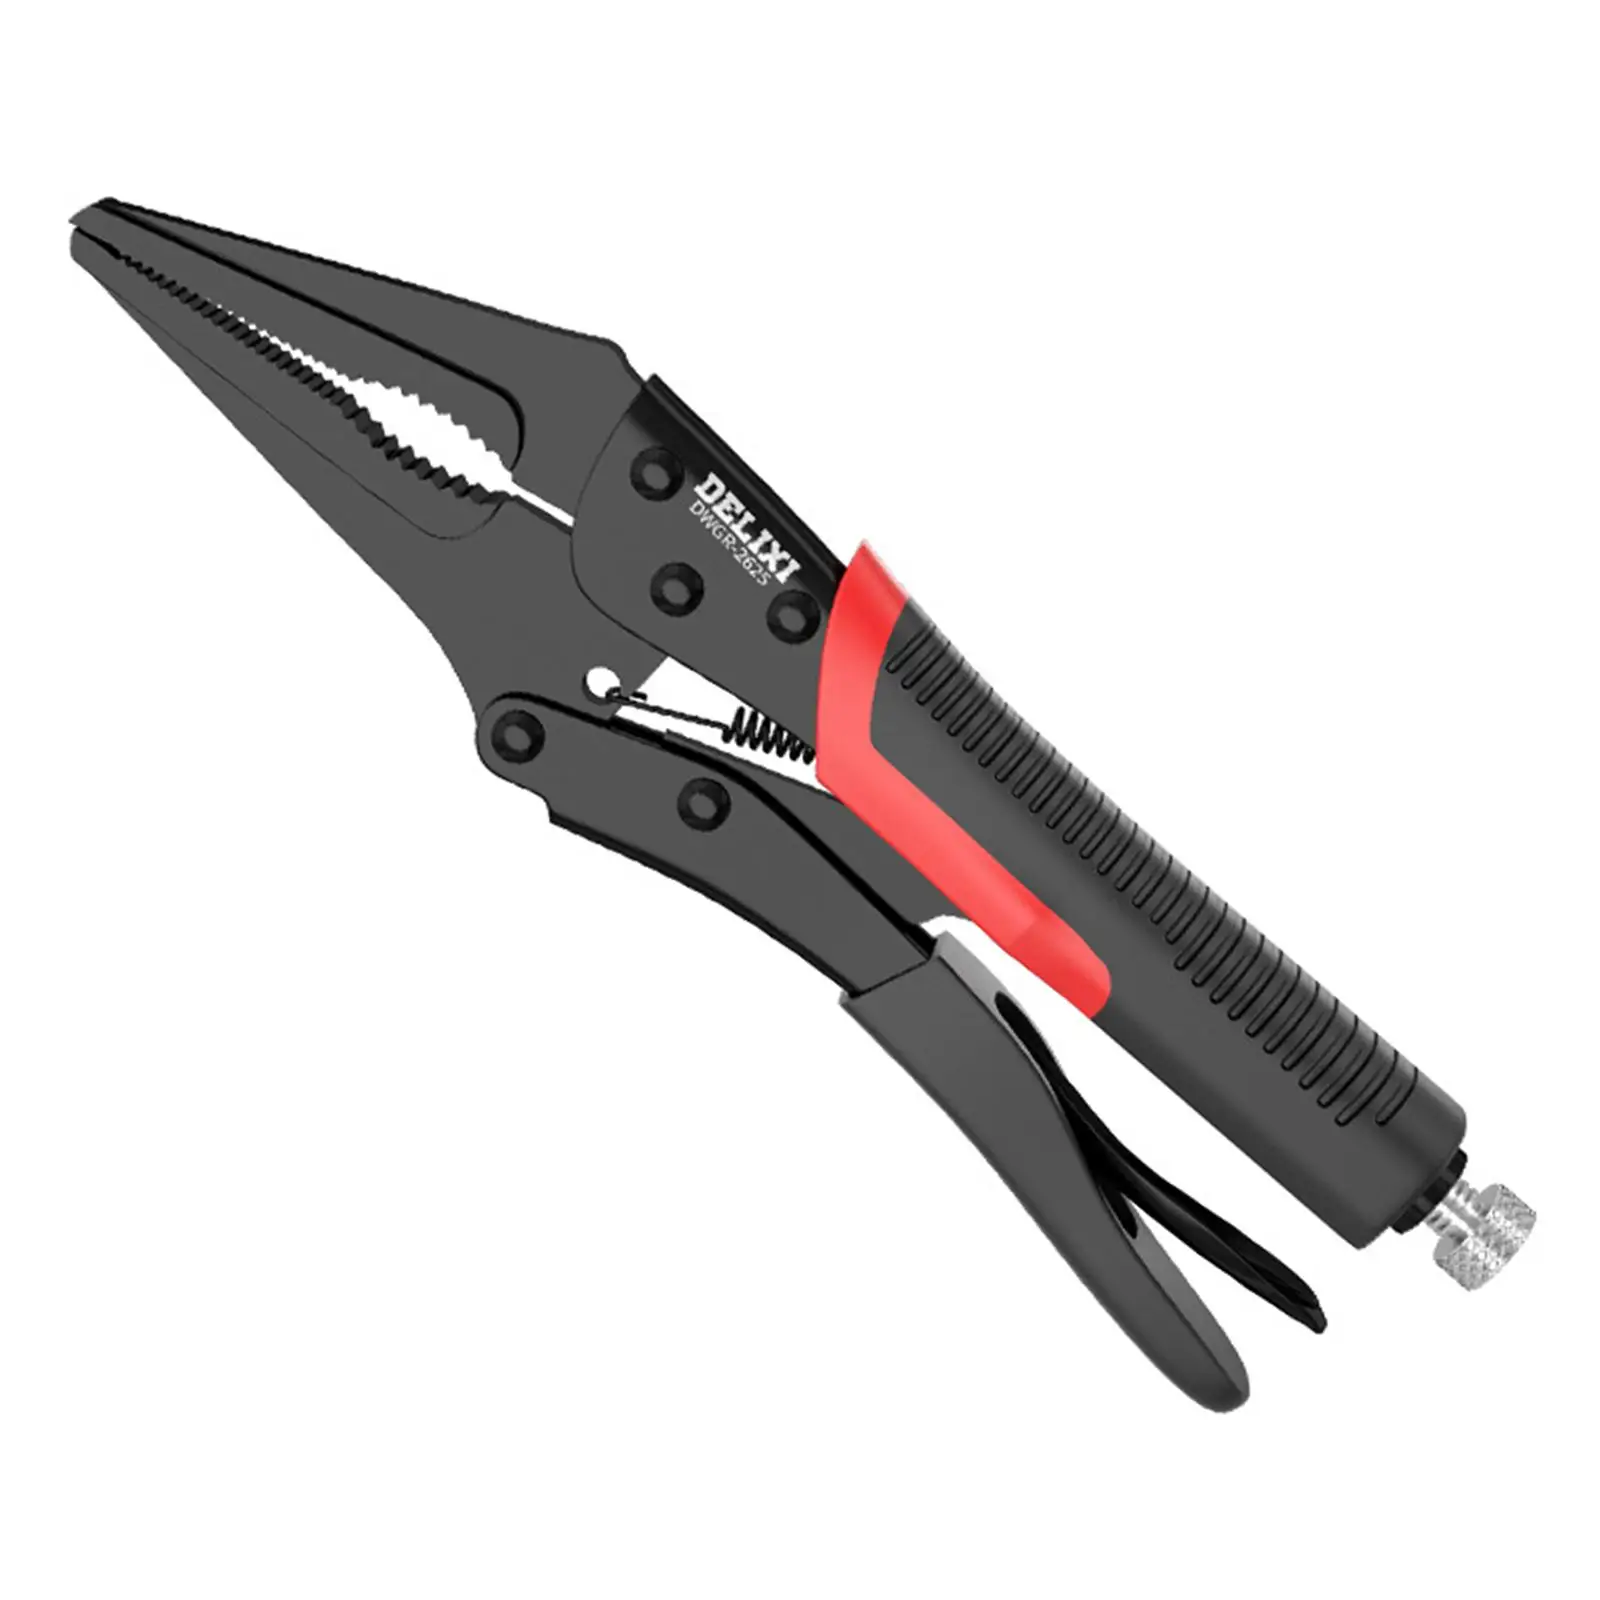 Locking Plier Multifunction Hand Tools Universal Heavy Duty Manual Fixed Pliers for Twisting Screw Removal Woodworking Clamping